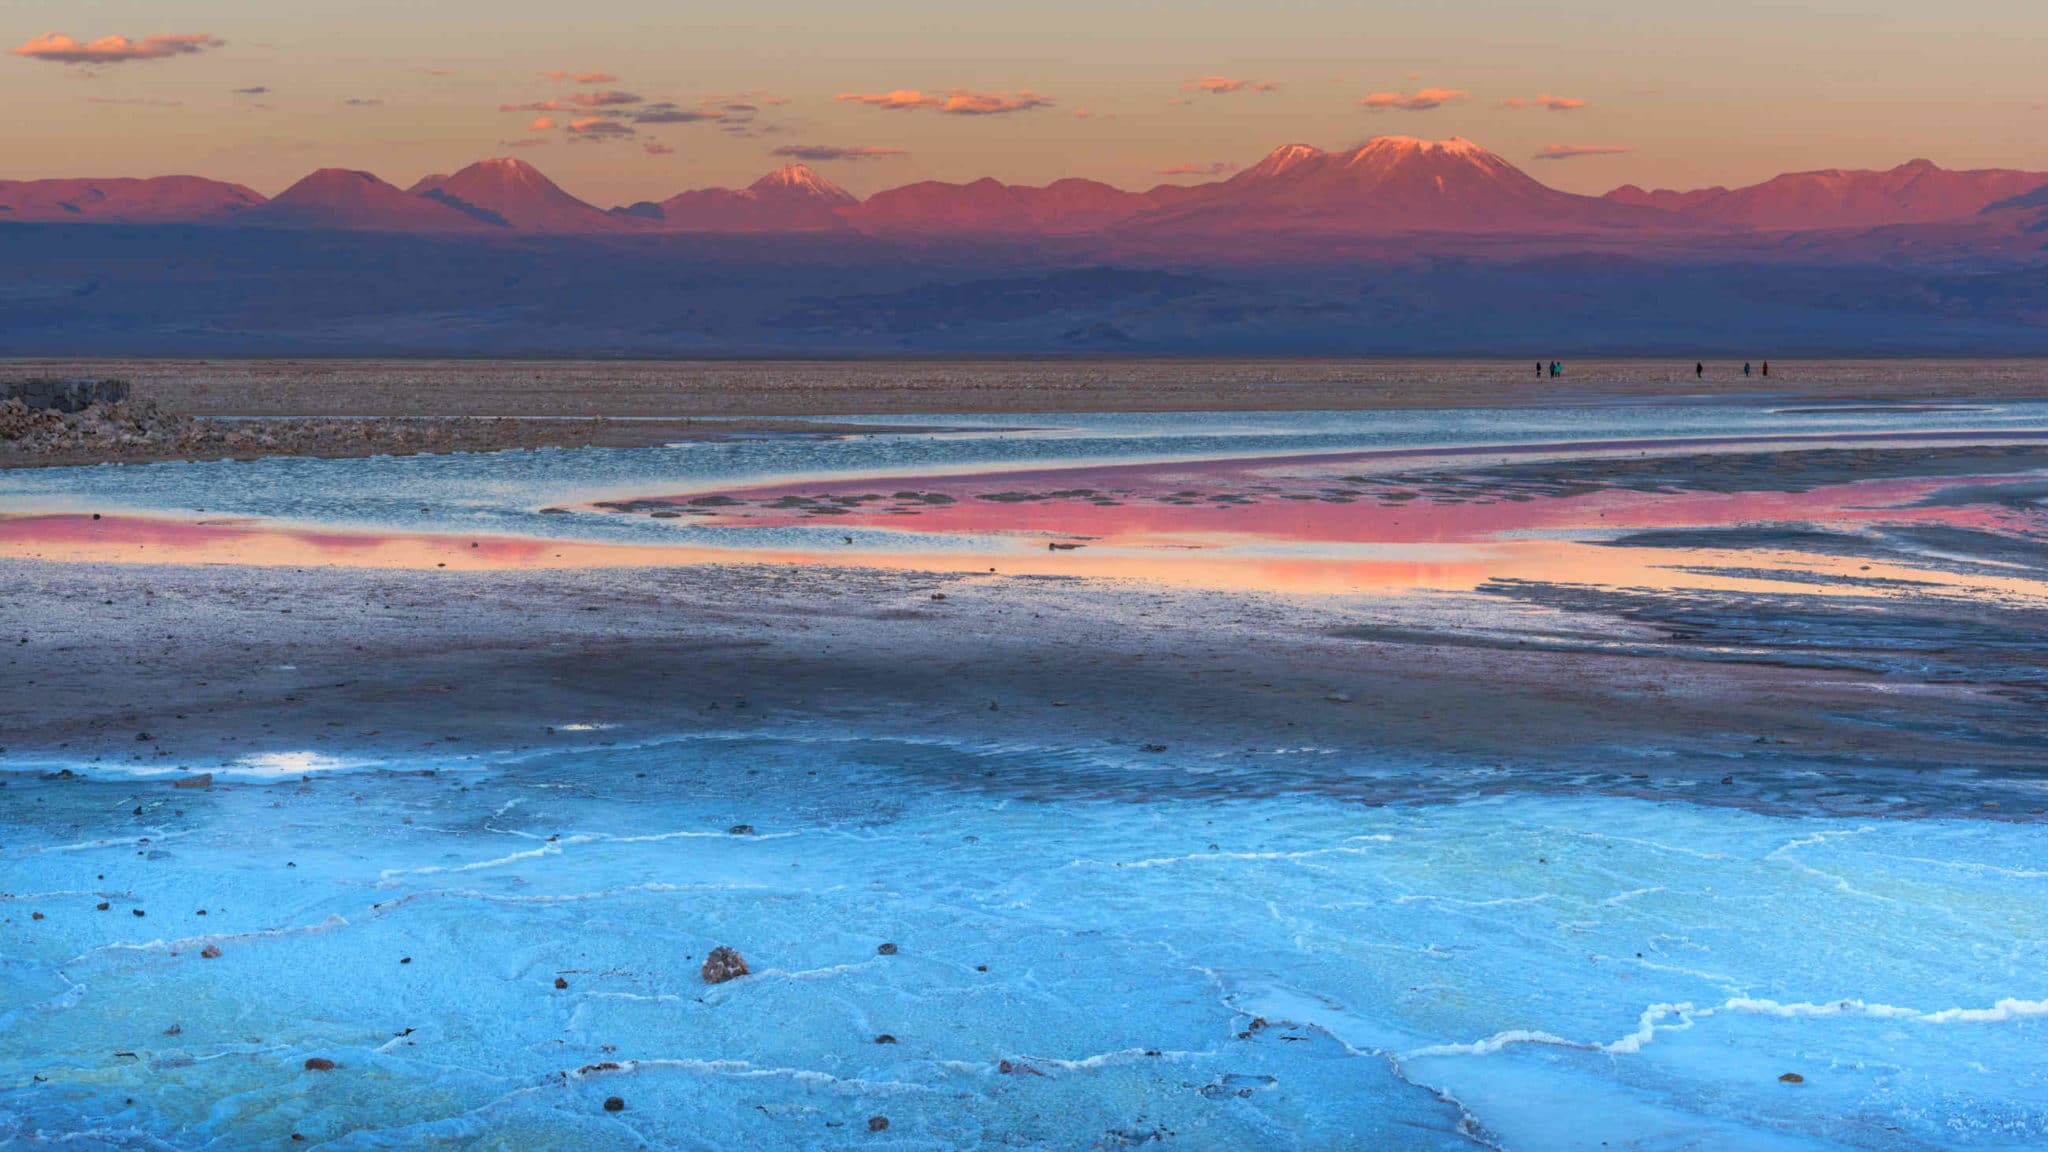 Salar de Atacama - the Atacama Salt Flat. Underneath this Rhode Island-sized expanse of salts lies a reservoir of lithium. But pumping that reservoir to the surface may disrupt a complex ecosystem that the Chilean government is only beginning to understand.